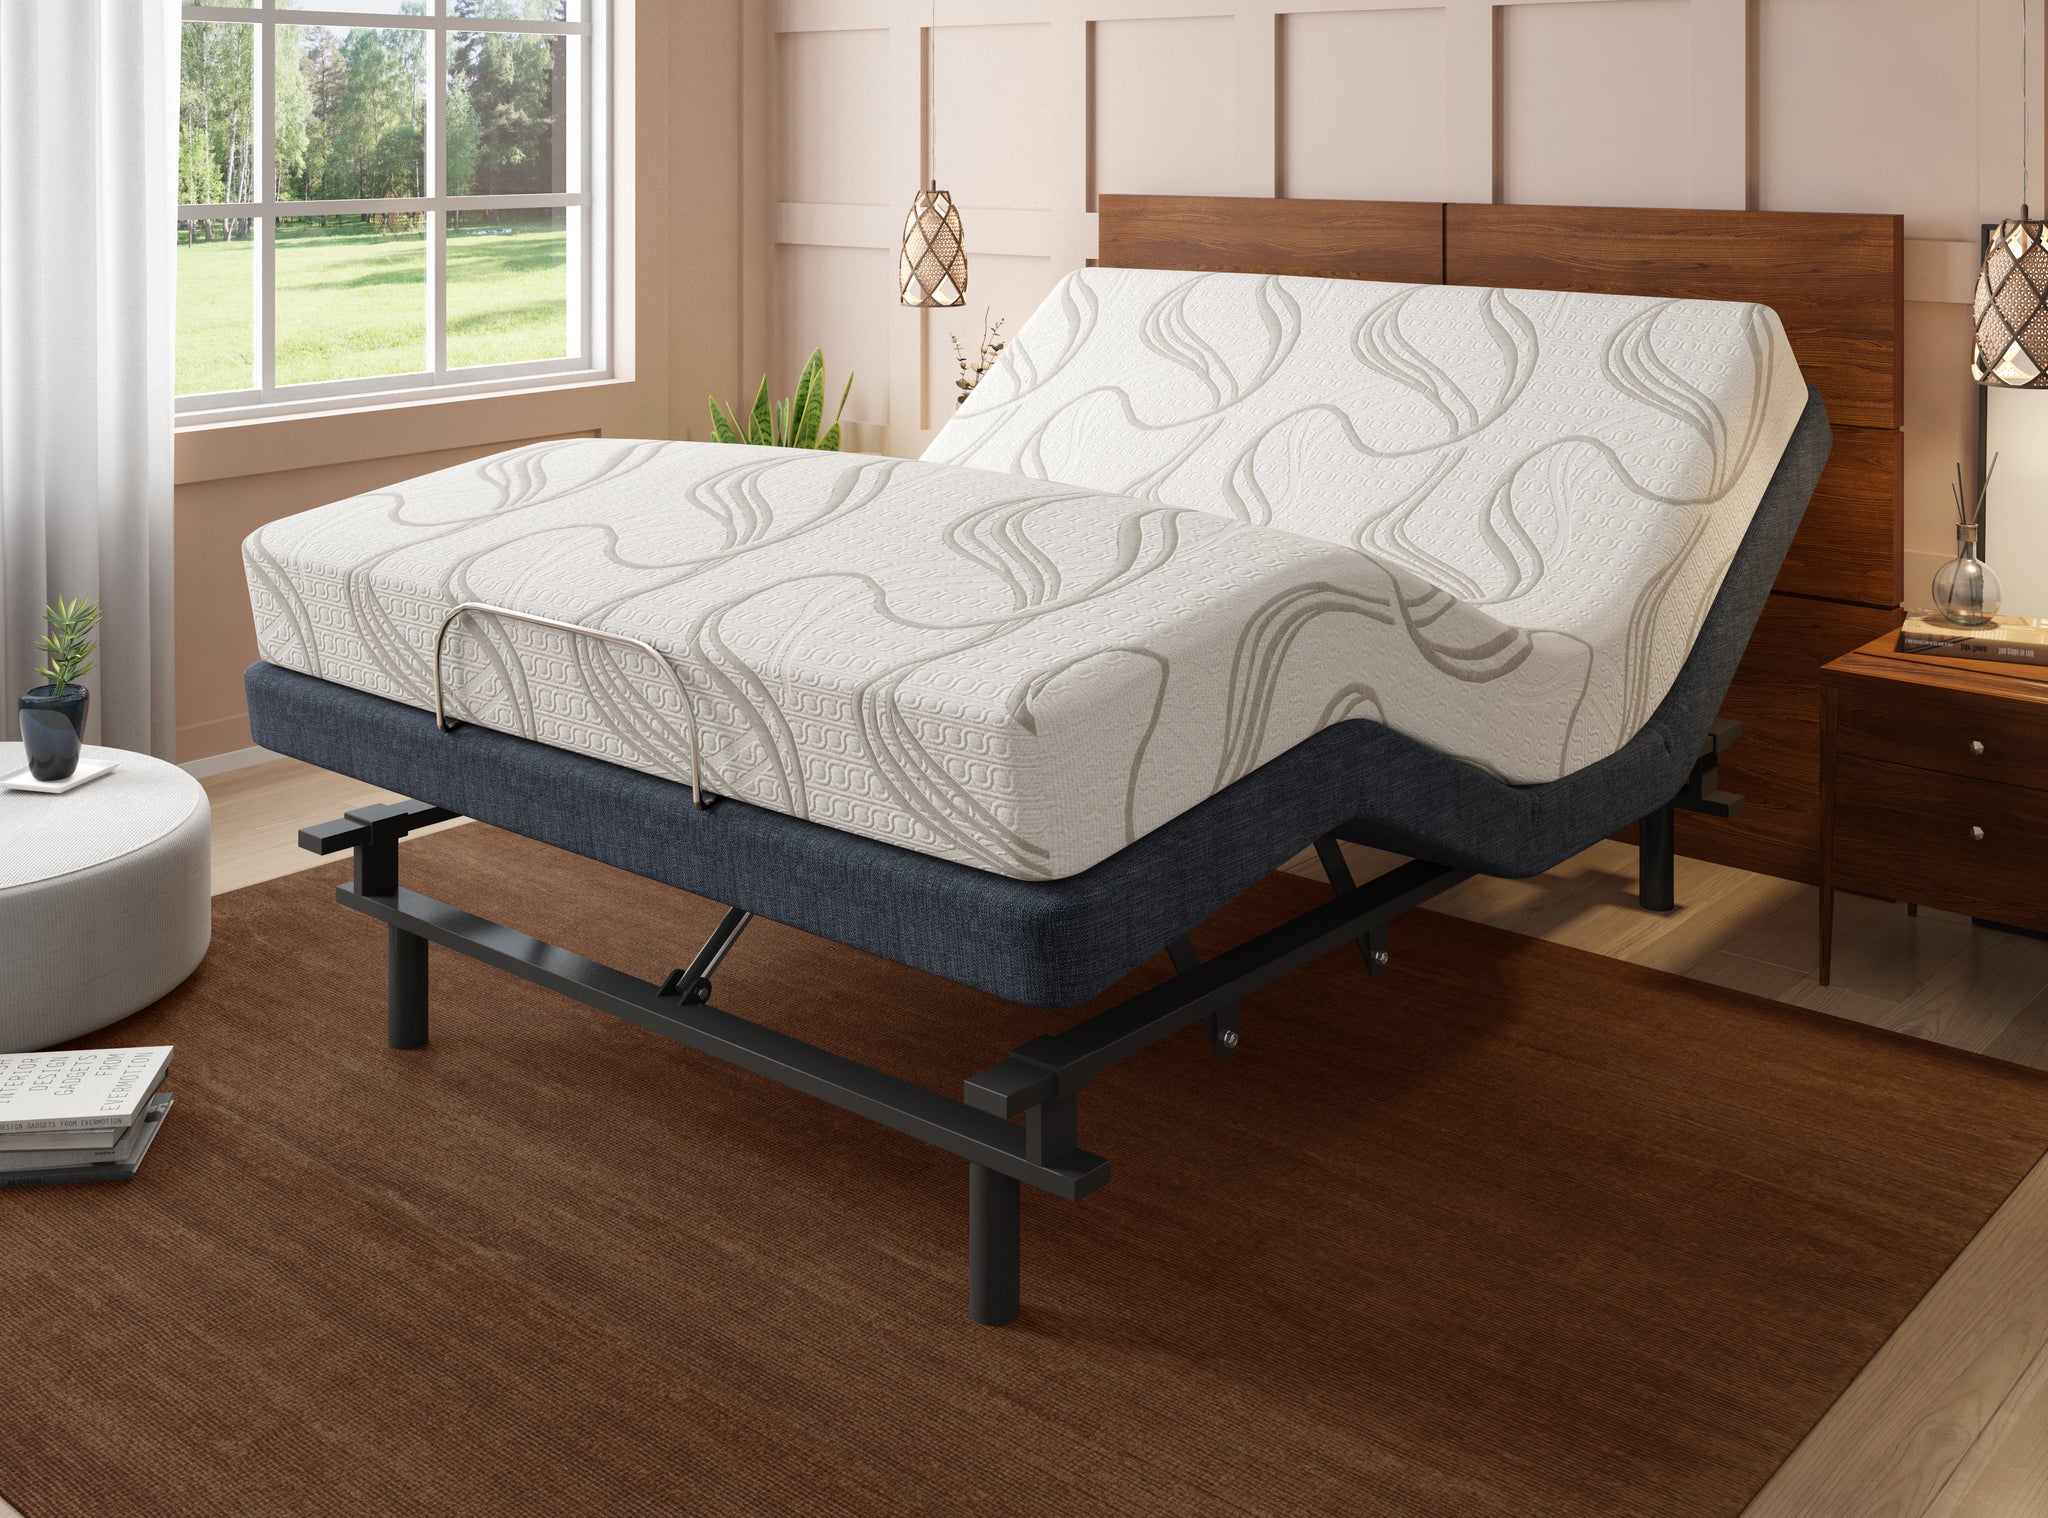 the sleep squad mattress outlet